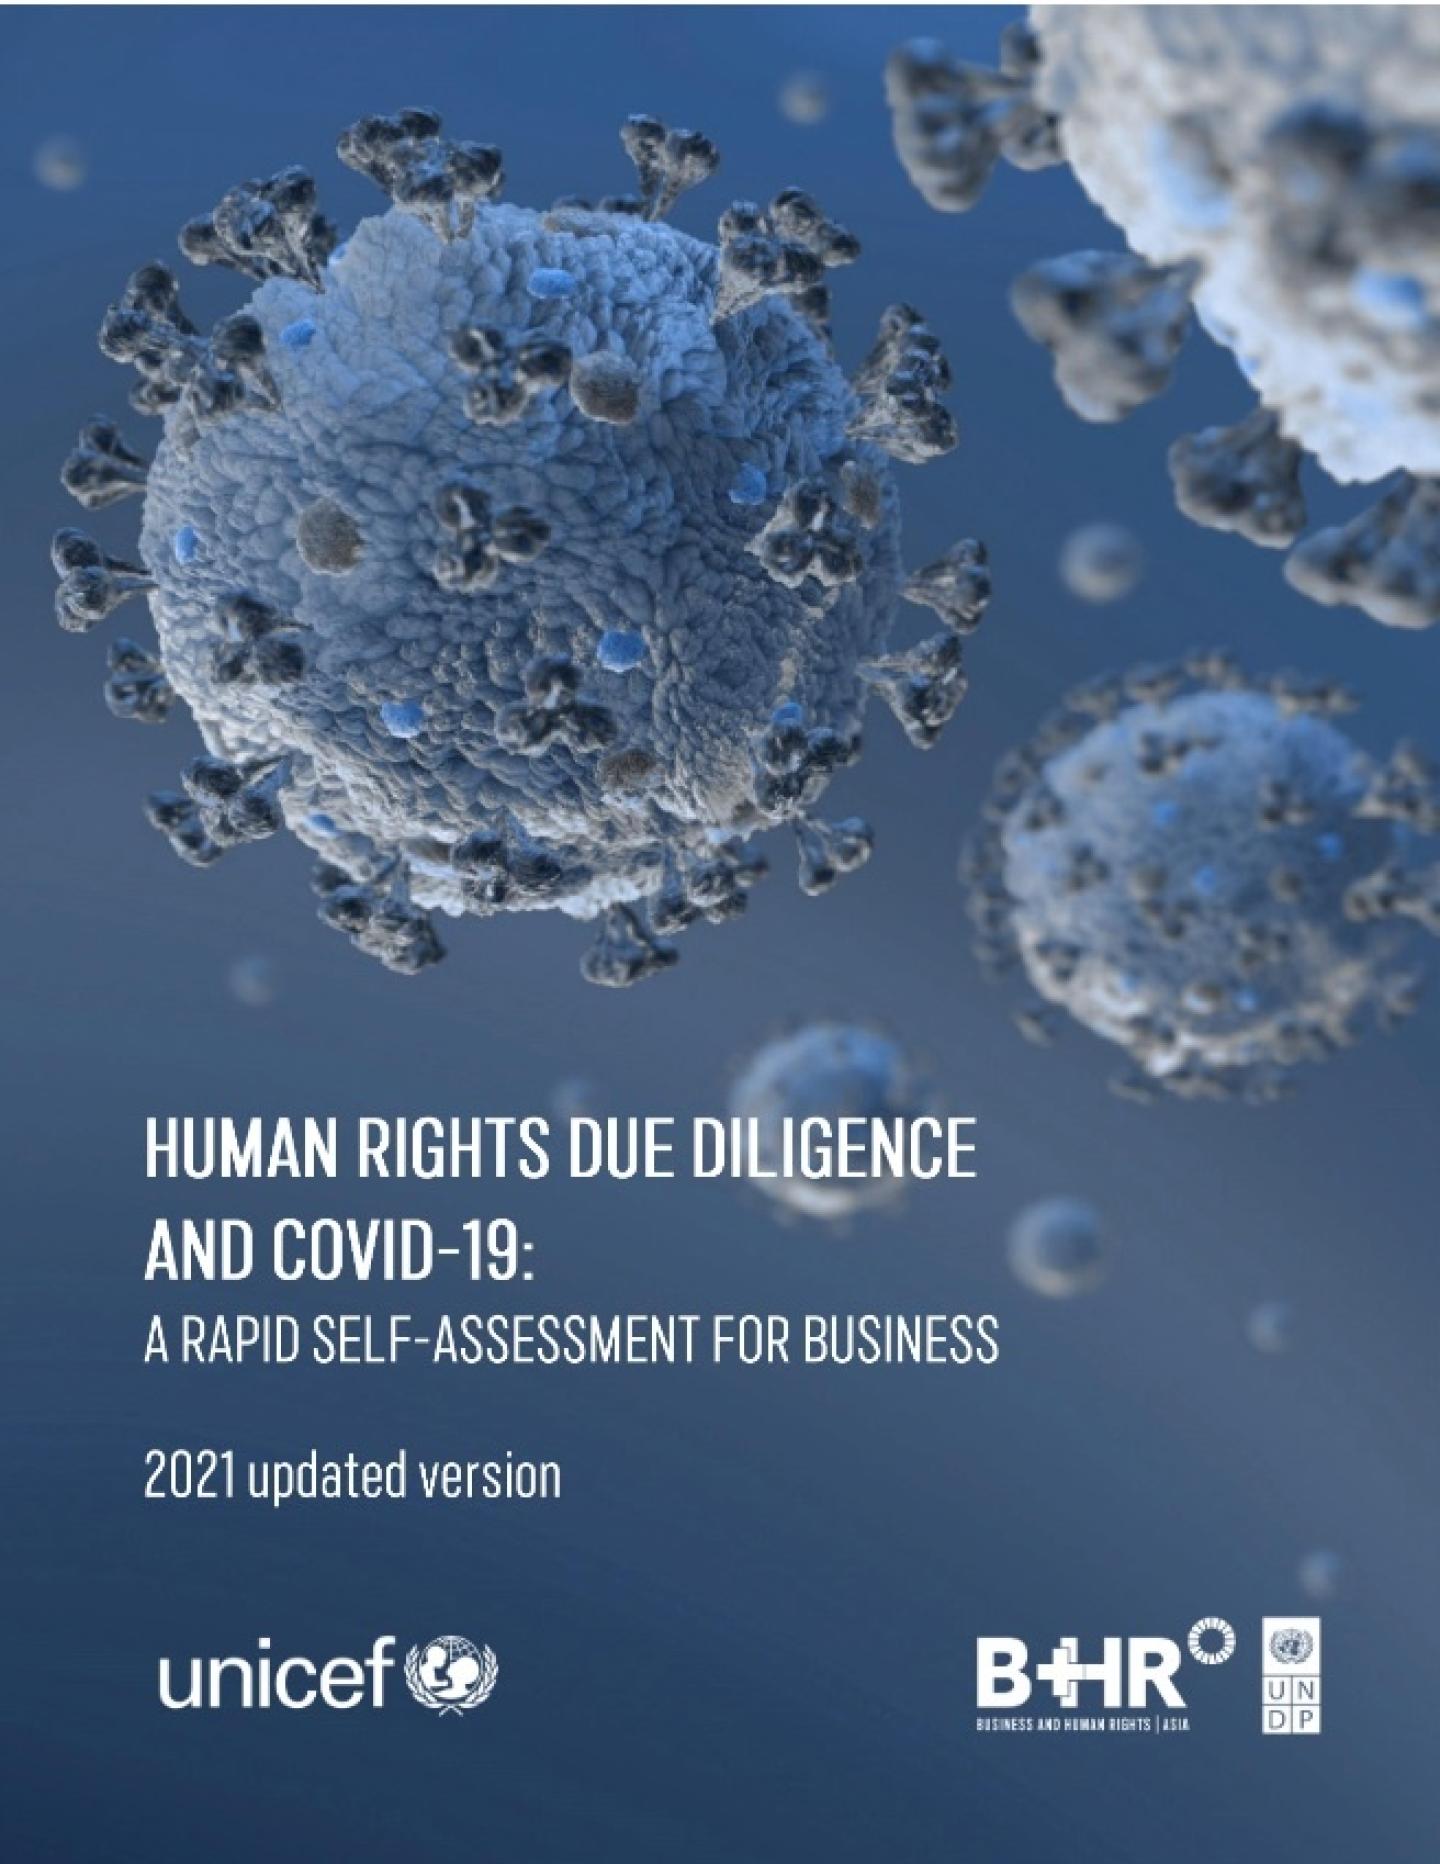 Human Rights Due Diligence and COVID-19: Rapid Self-Assessment for